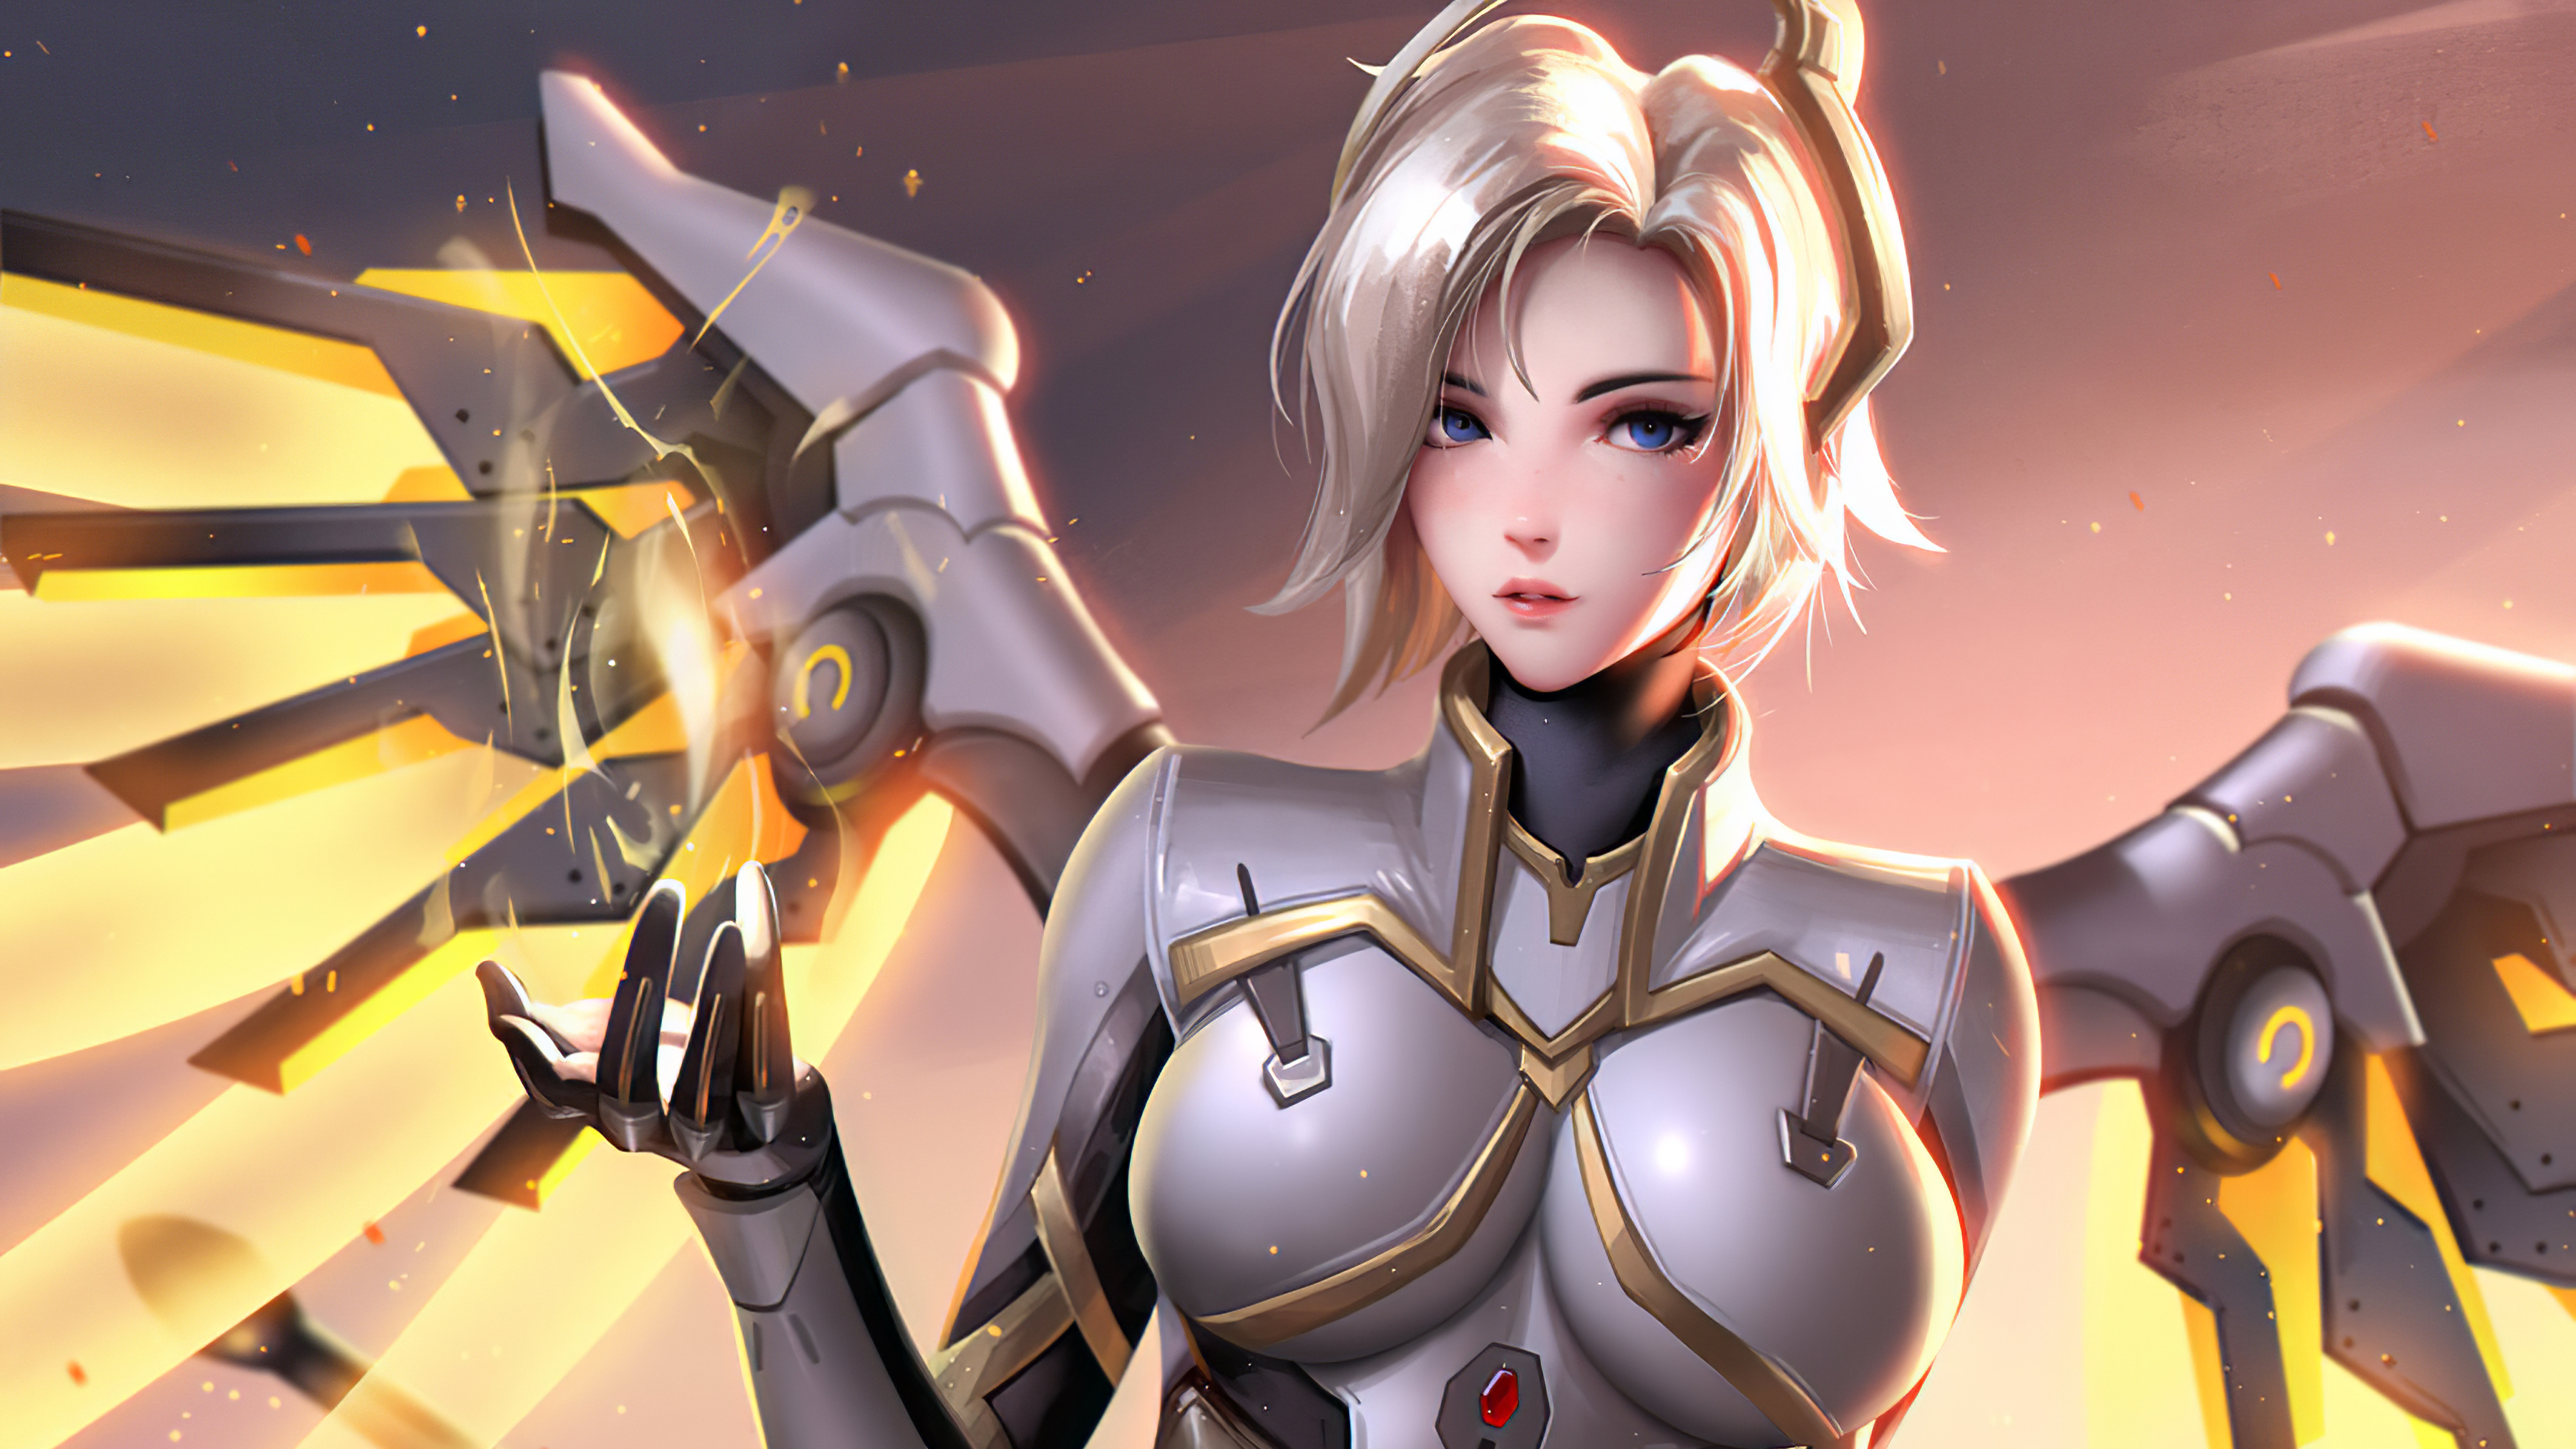 Mercy Overwatch 2 4k Hd Games 4k Wallpapers Images Backgrounds Photos And Pictures